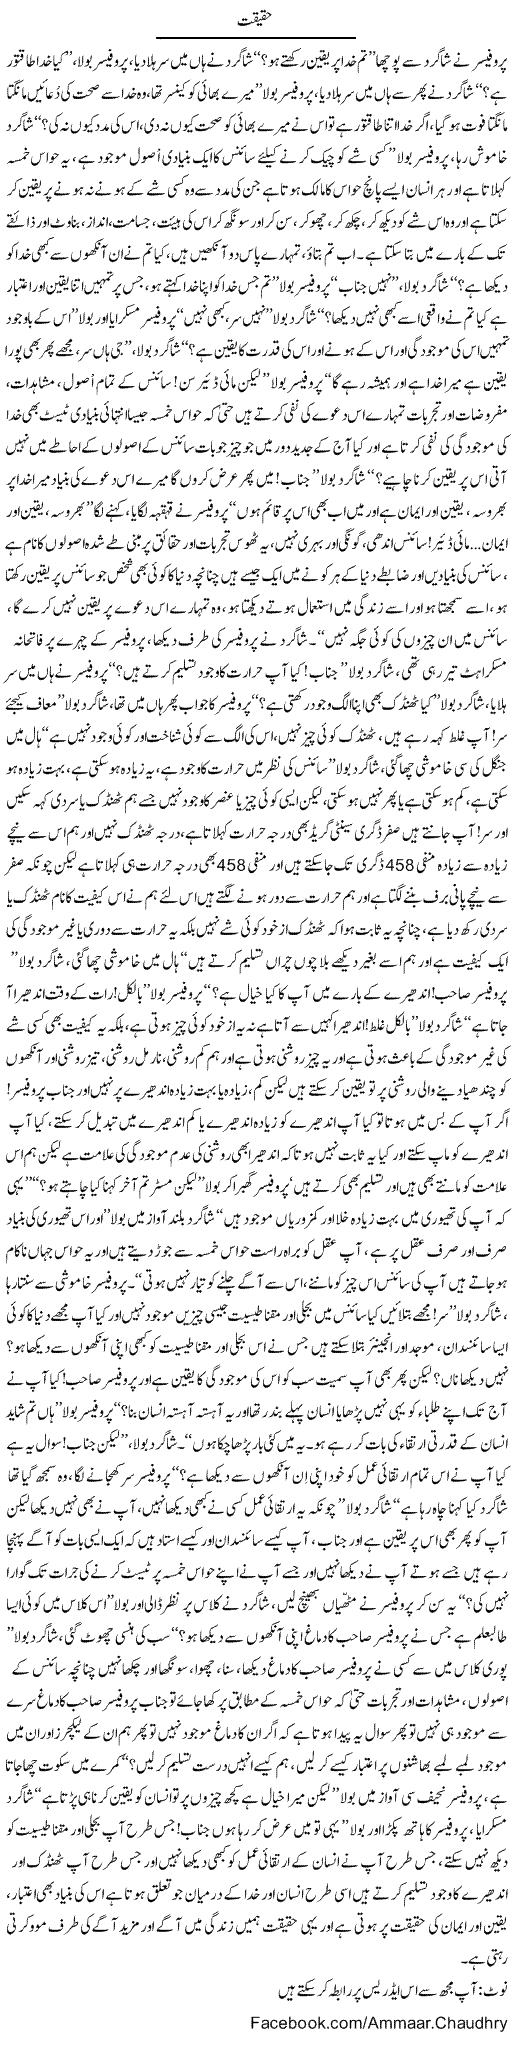 Existence of Allah Express Column Amad Chaudhry 22 May 2011